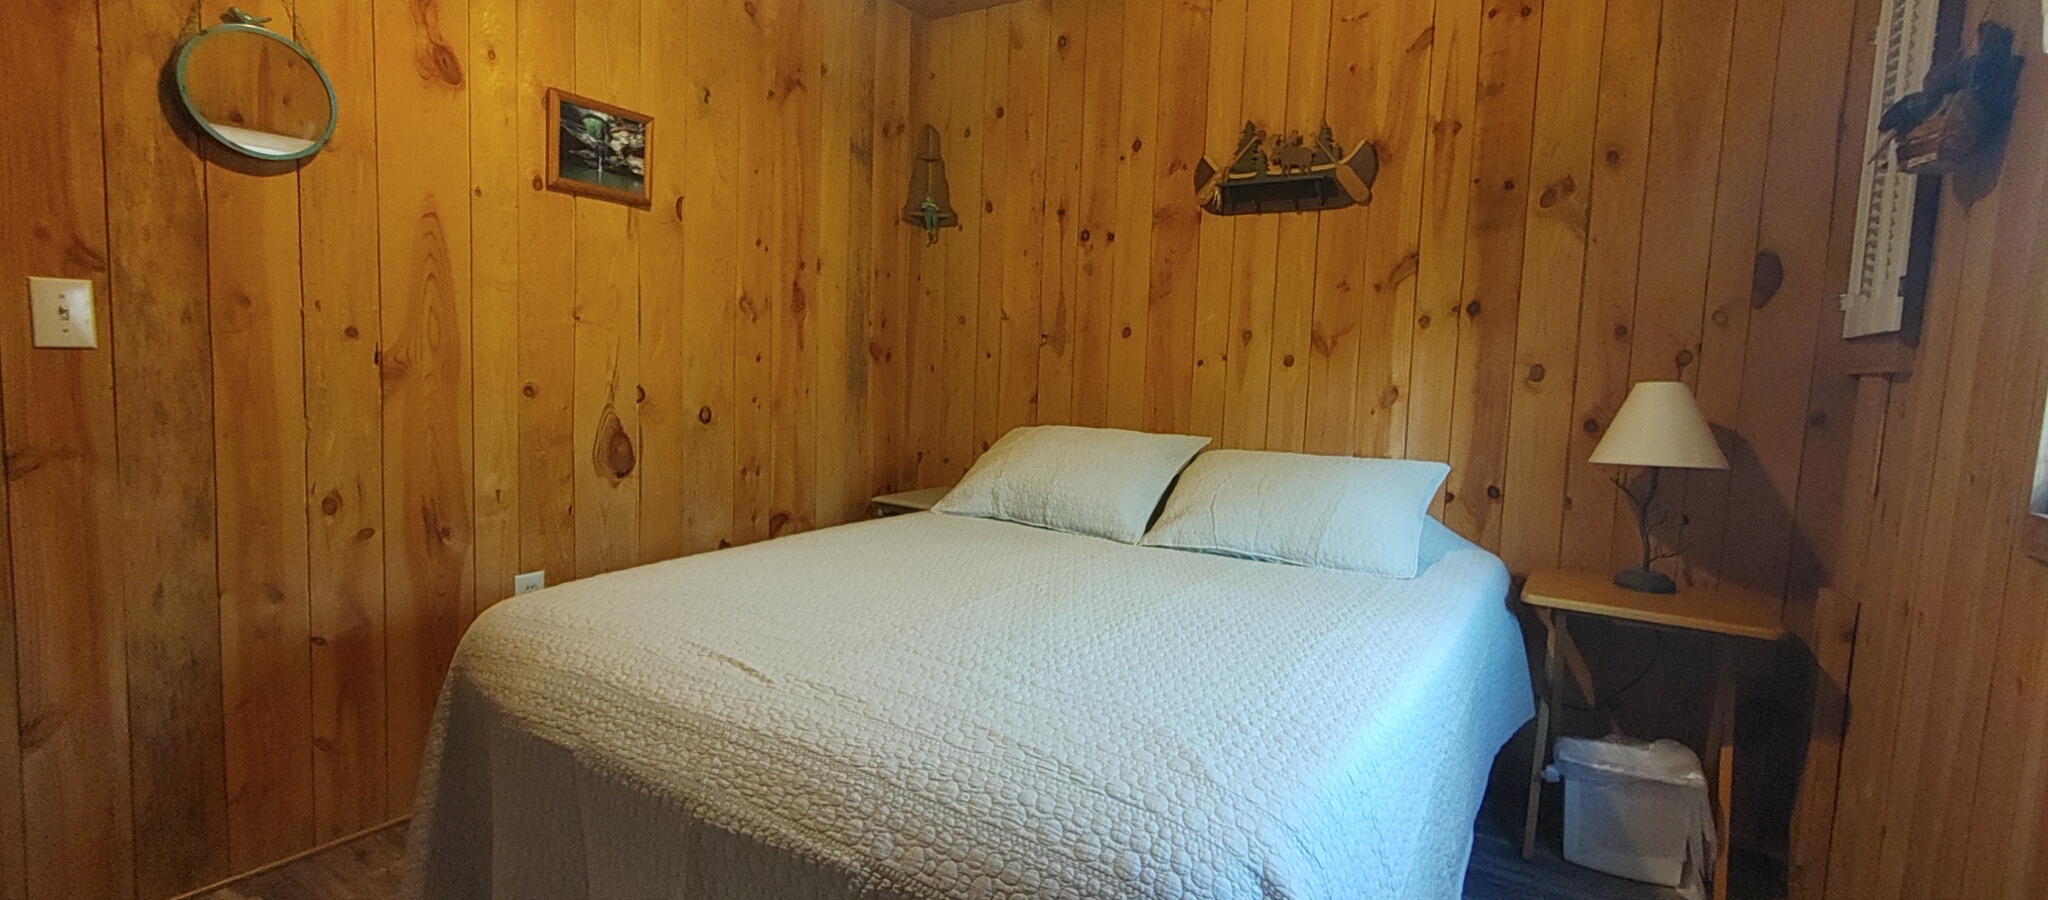 Photo 625_12512.jpg - Knotty pine walls and ceiling give this space a traditional cabin feel. 